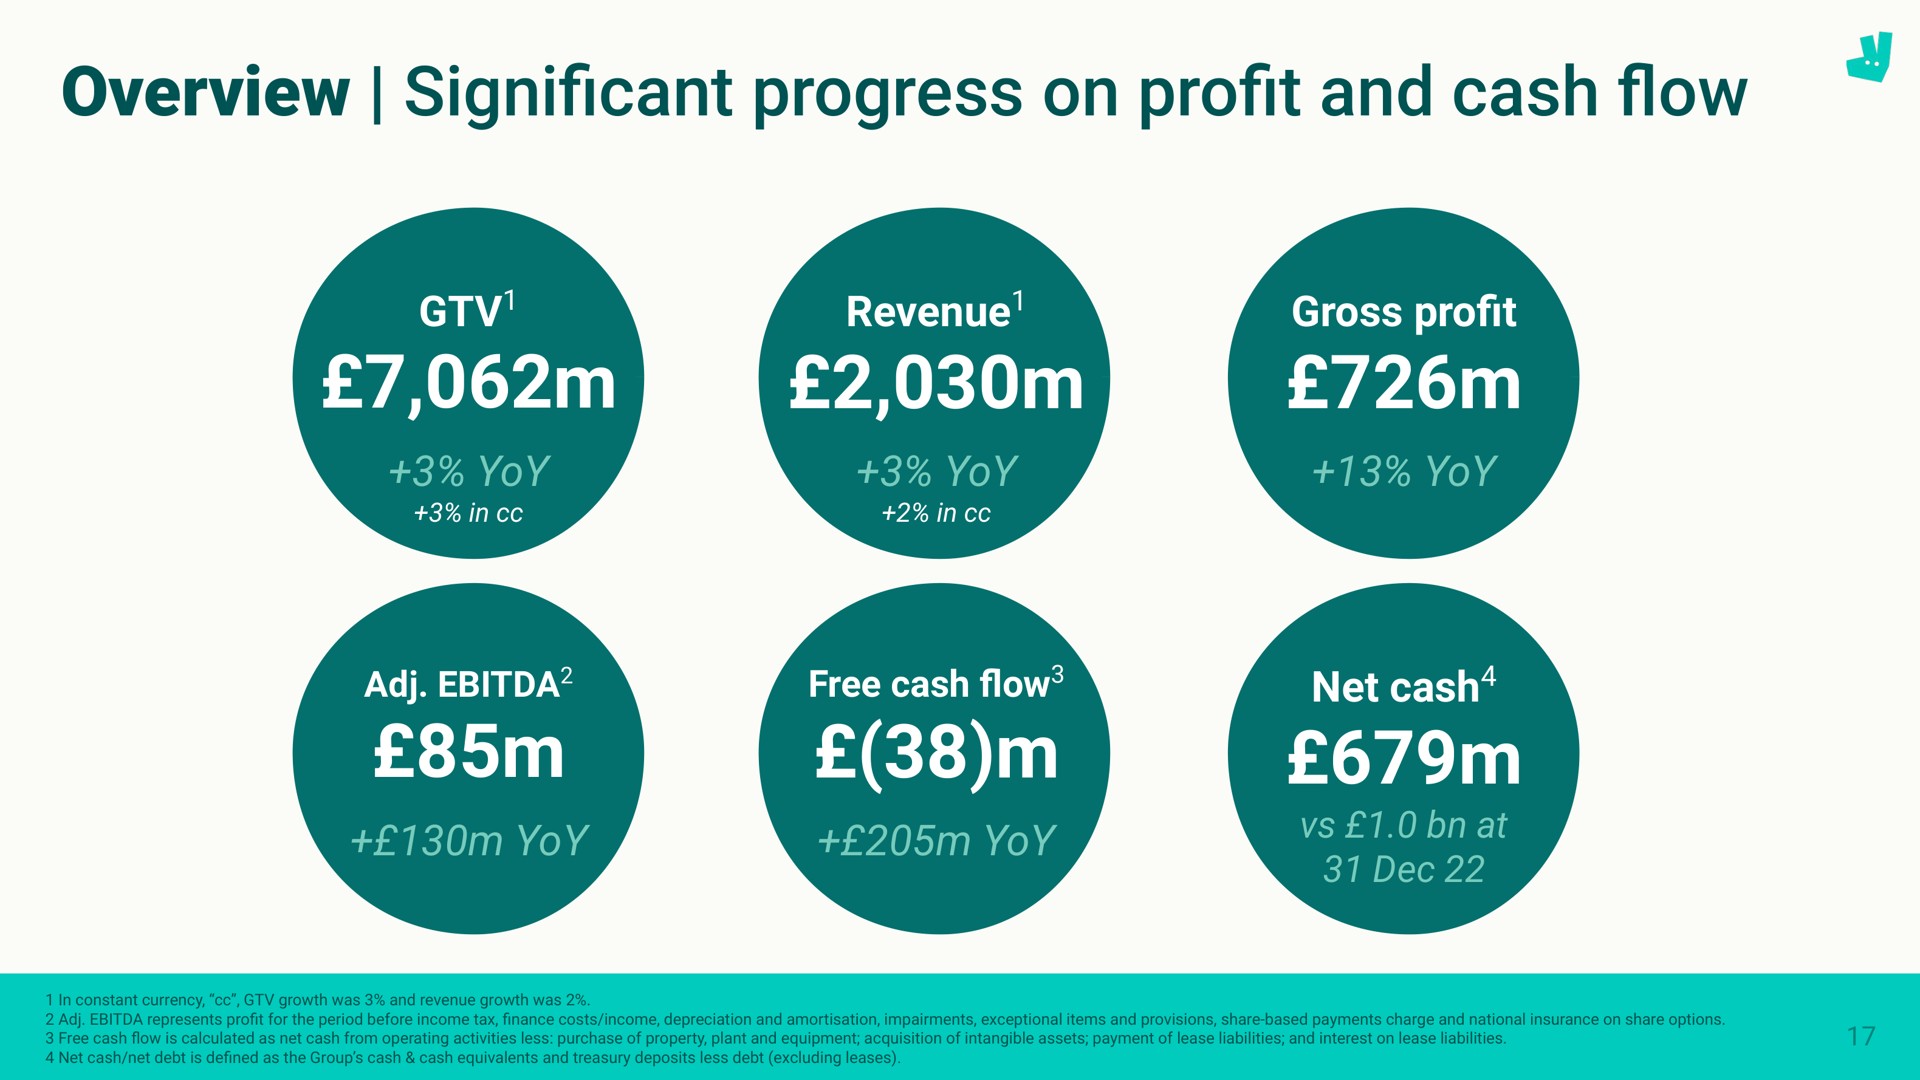 overview cant progress on pro and cash significant profit flow was | Deliveroo